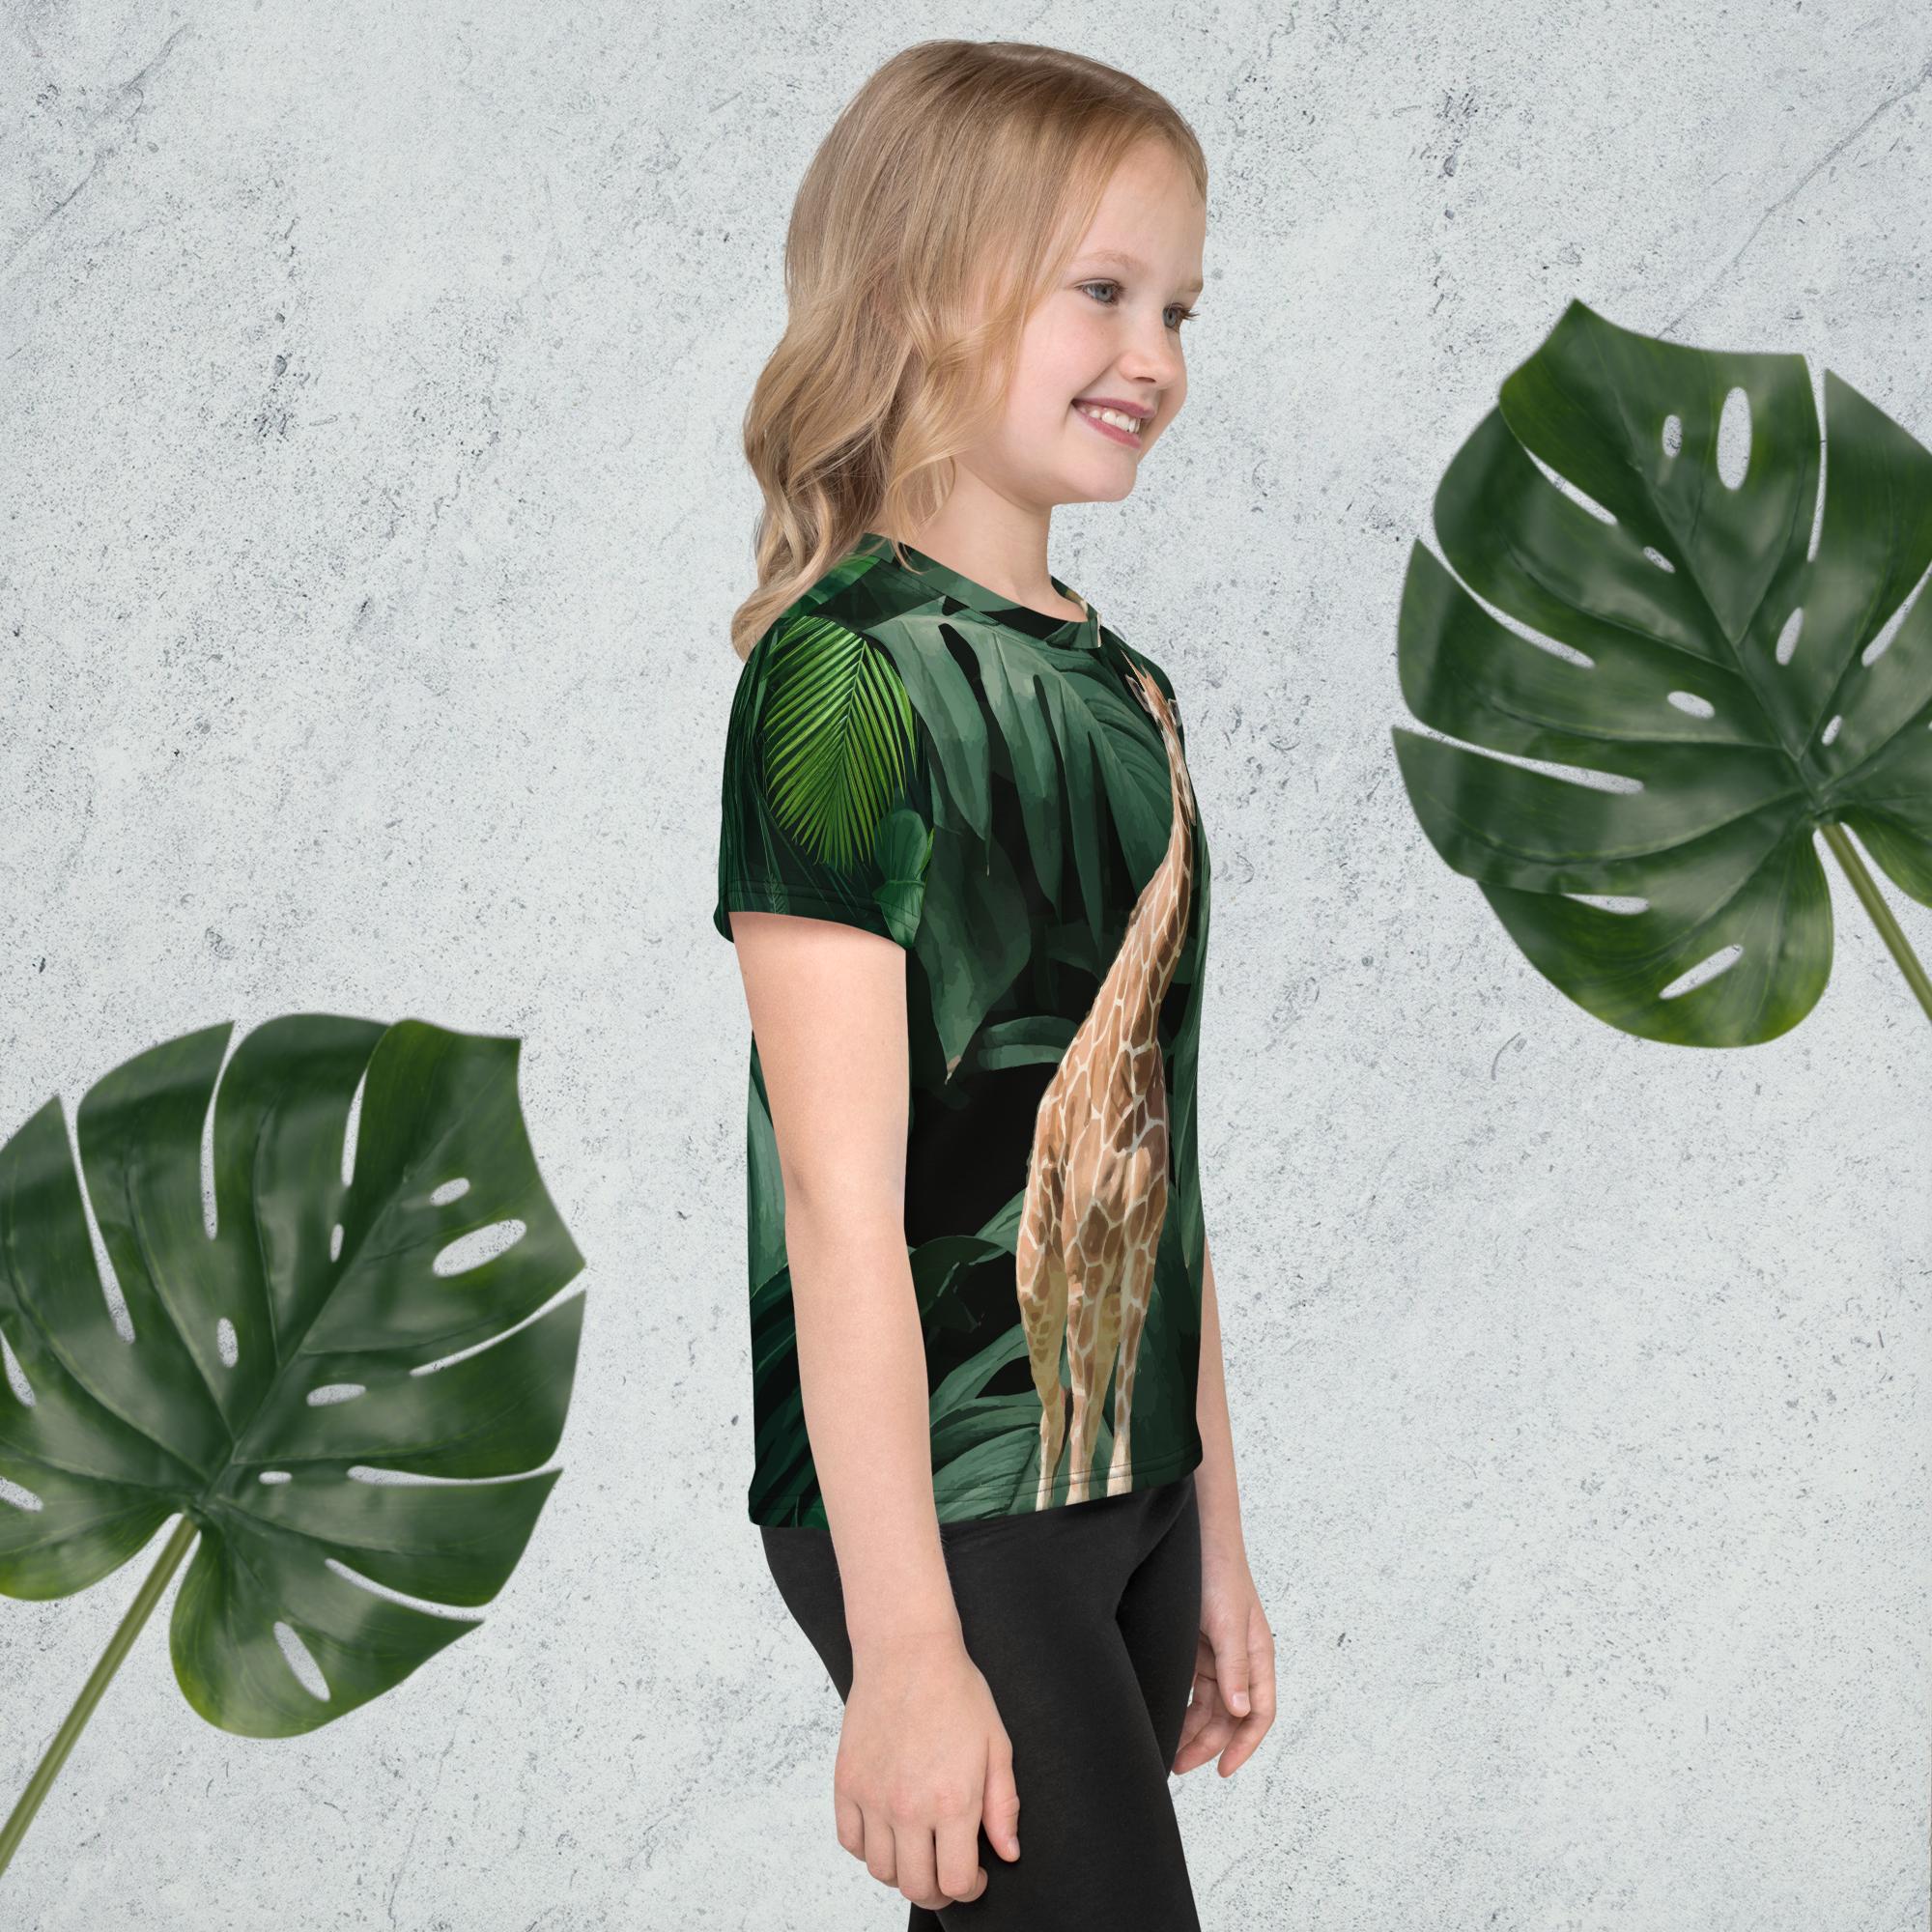 Kid's Giraffe Surrounded by Greenery Printed T-shirt